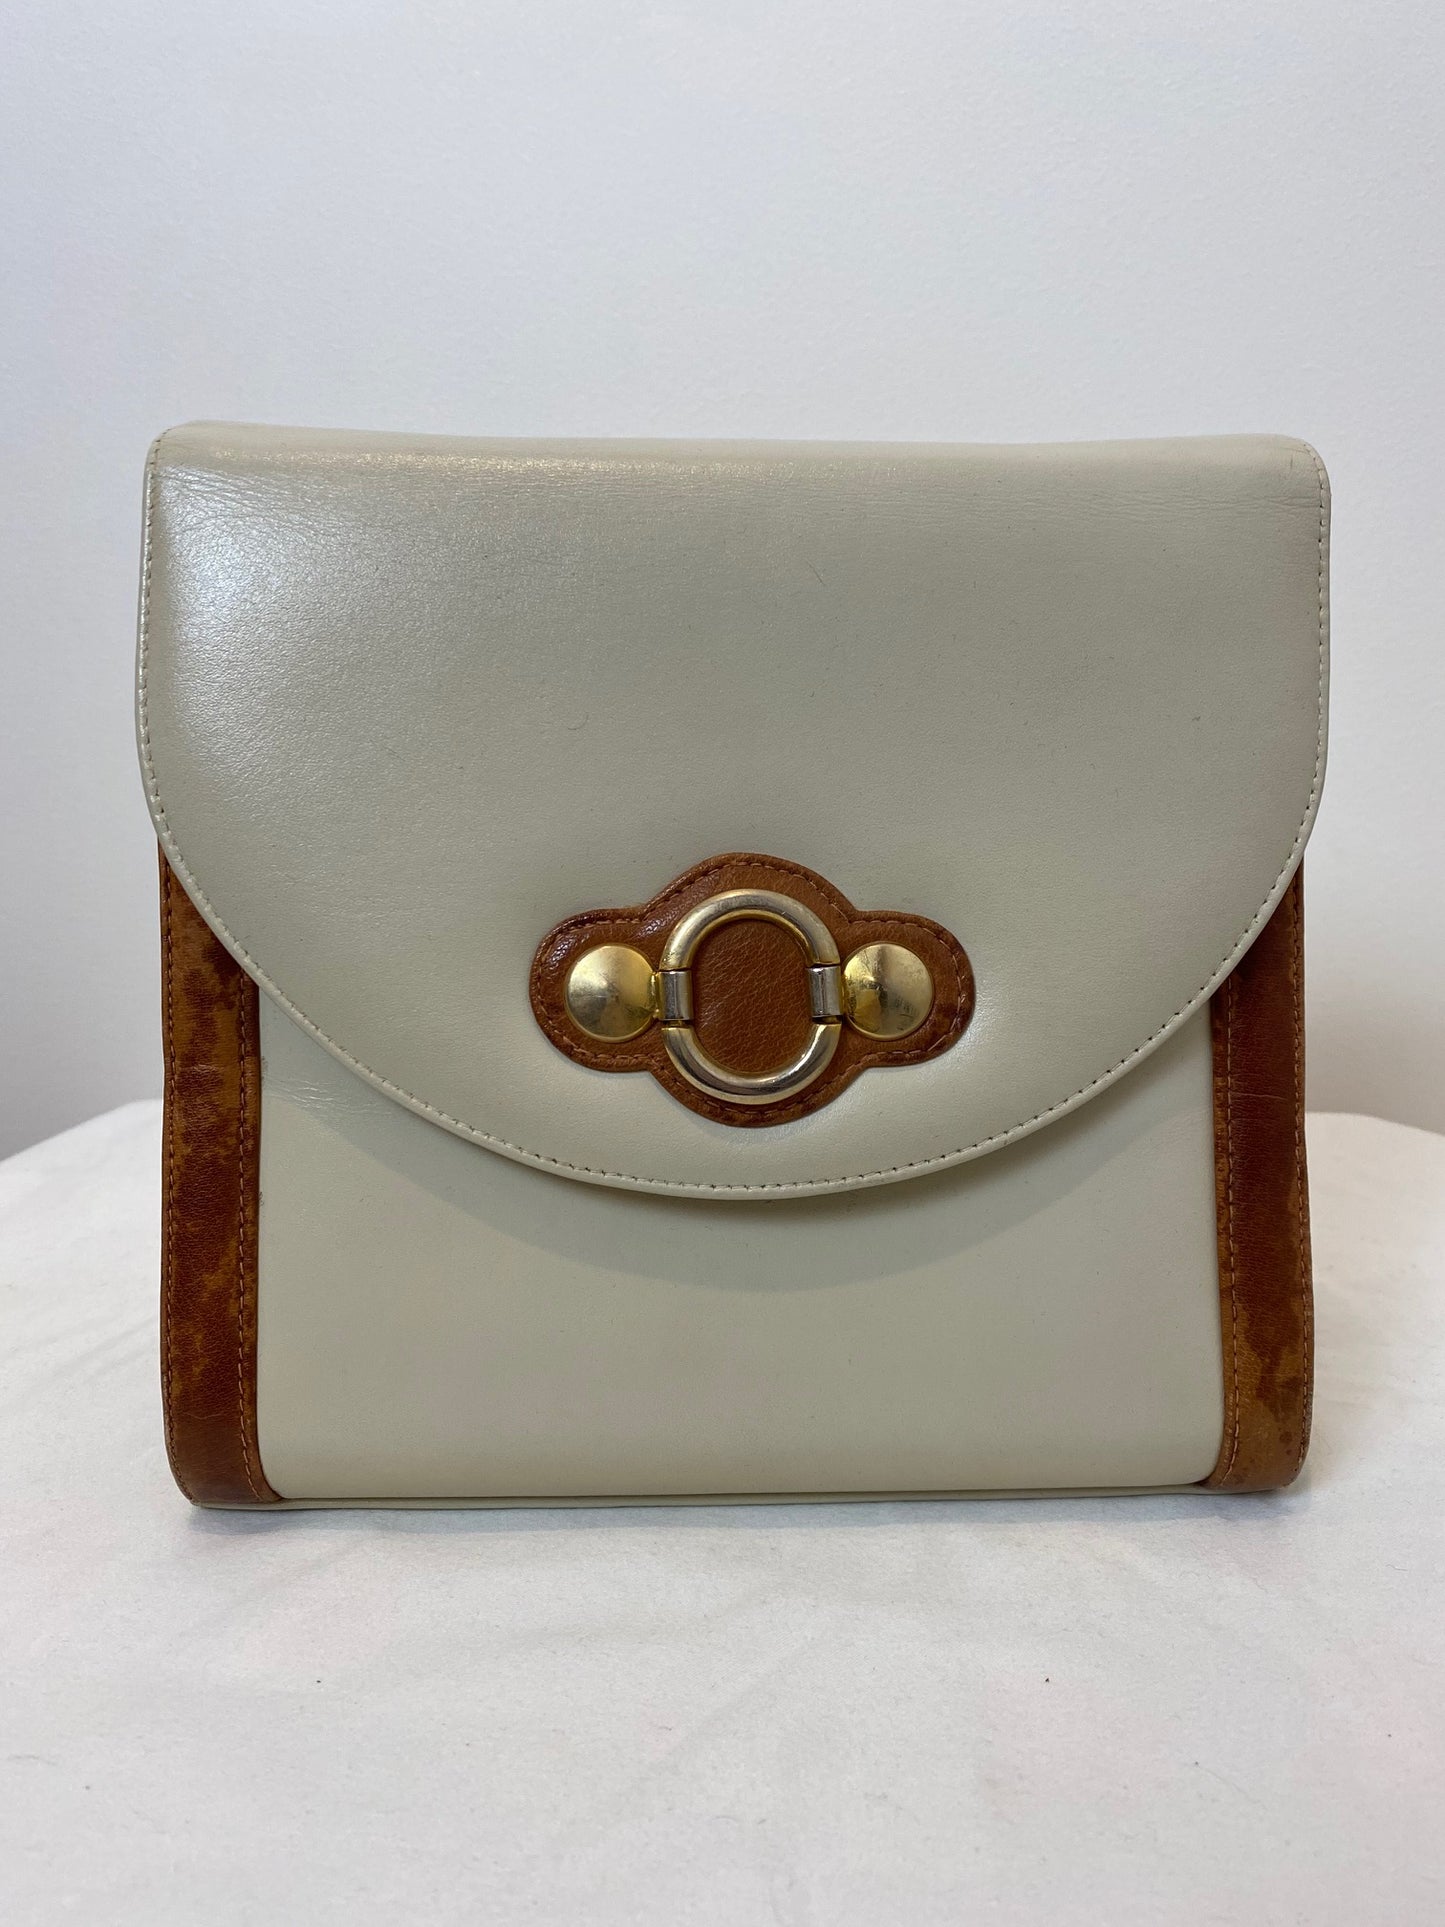 Tan and Brown Leather Structures Purse, 1980's